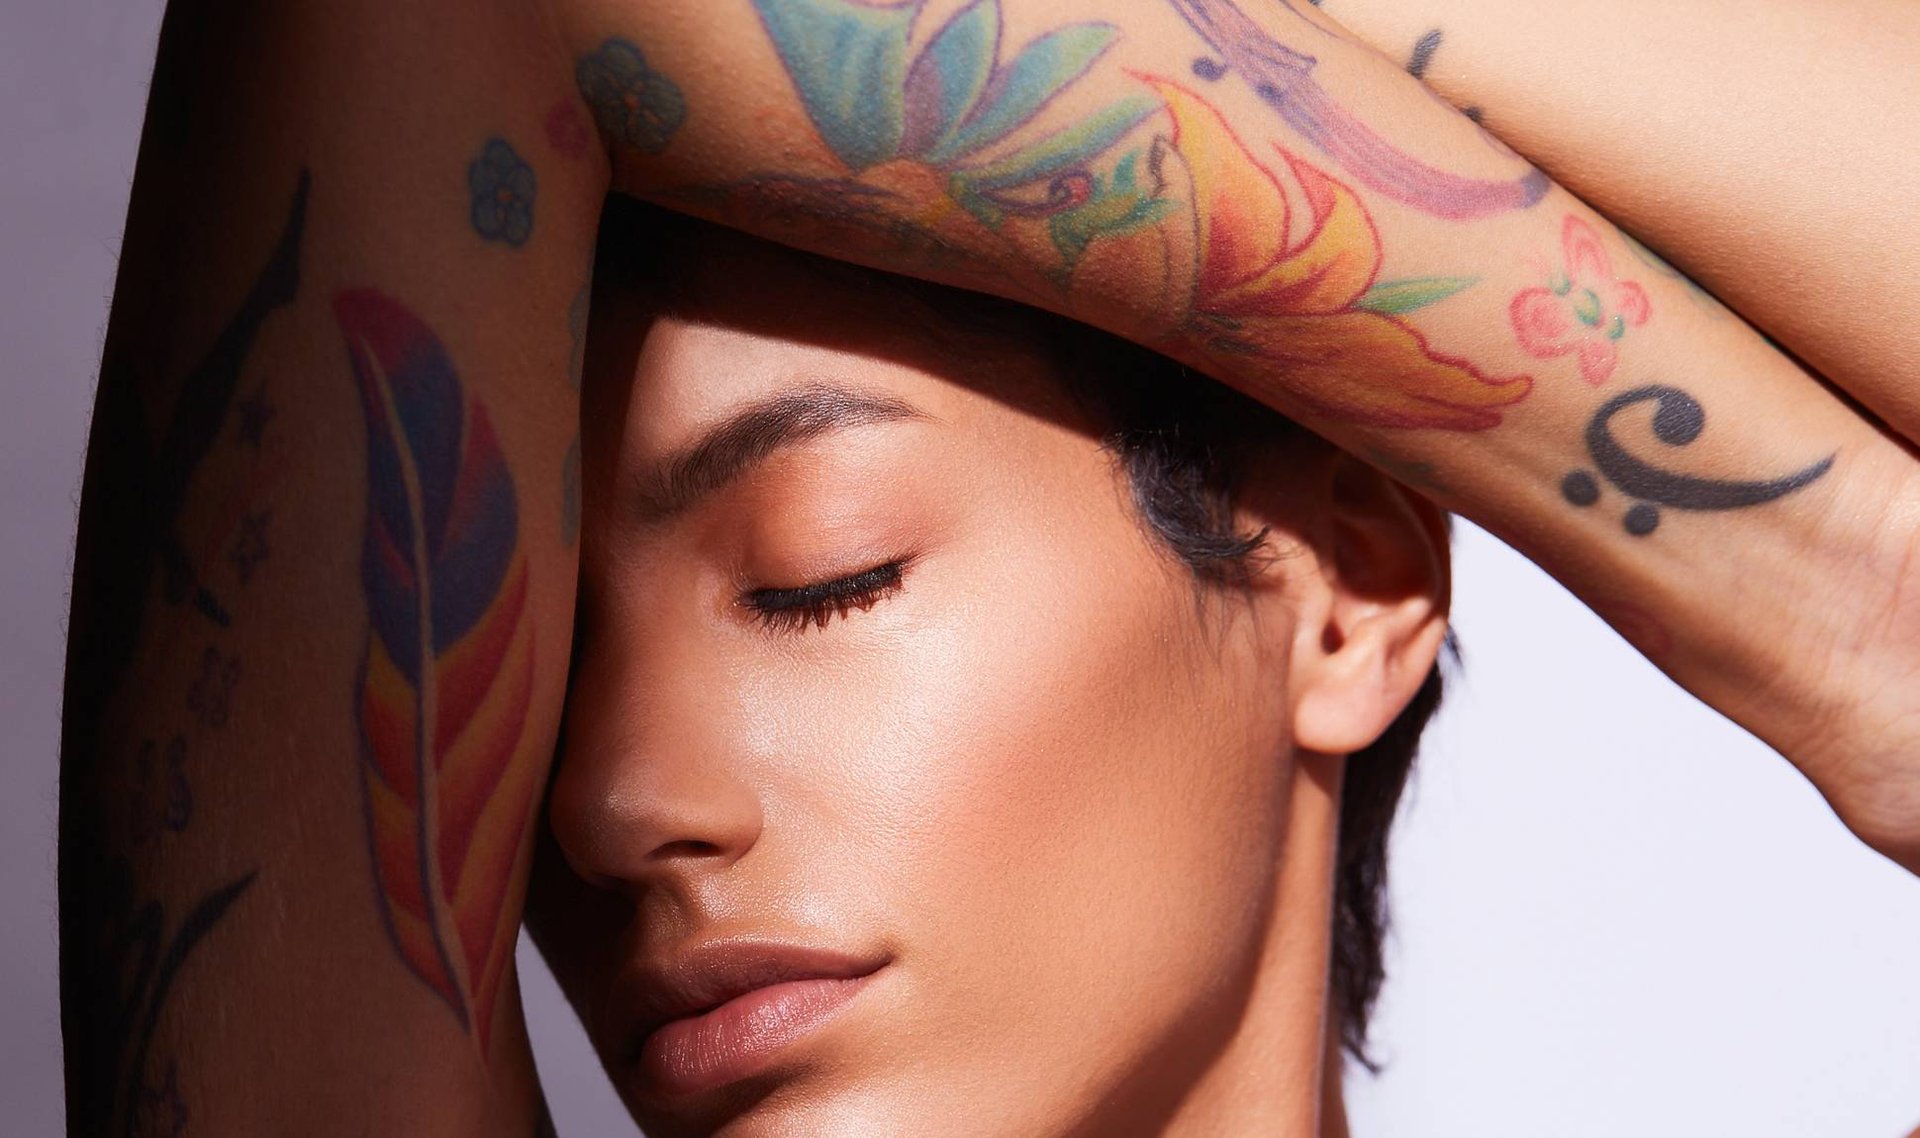 Is Your Tattoo Fading? Here’s How You Can Fix It